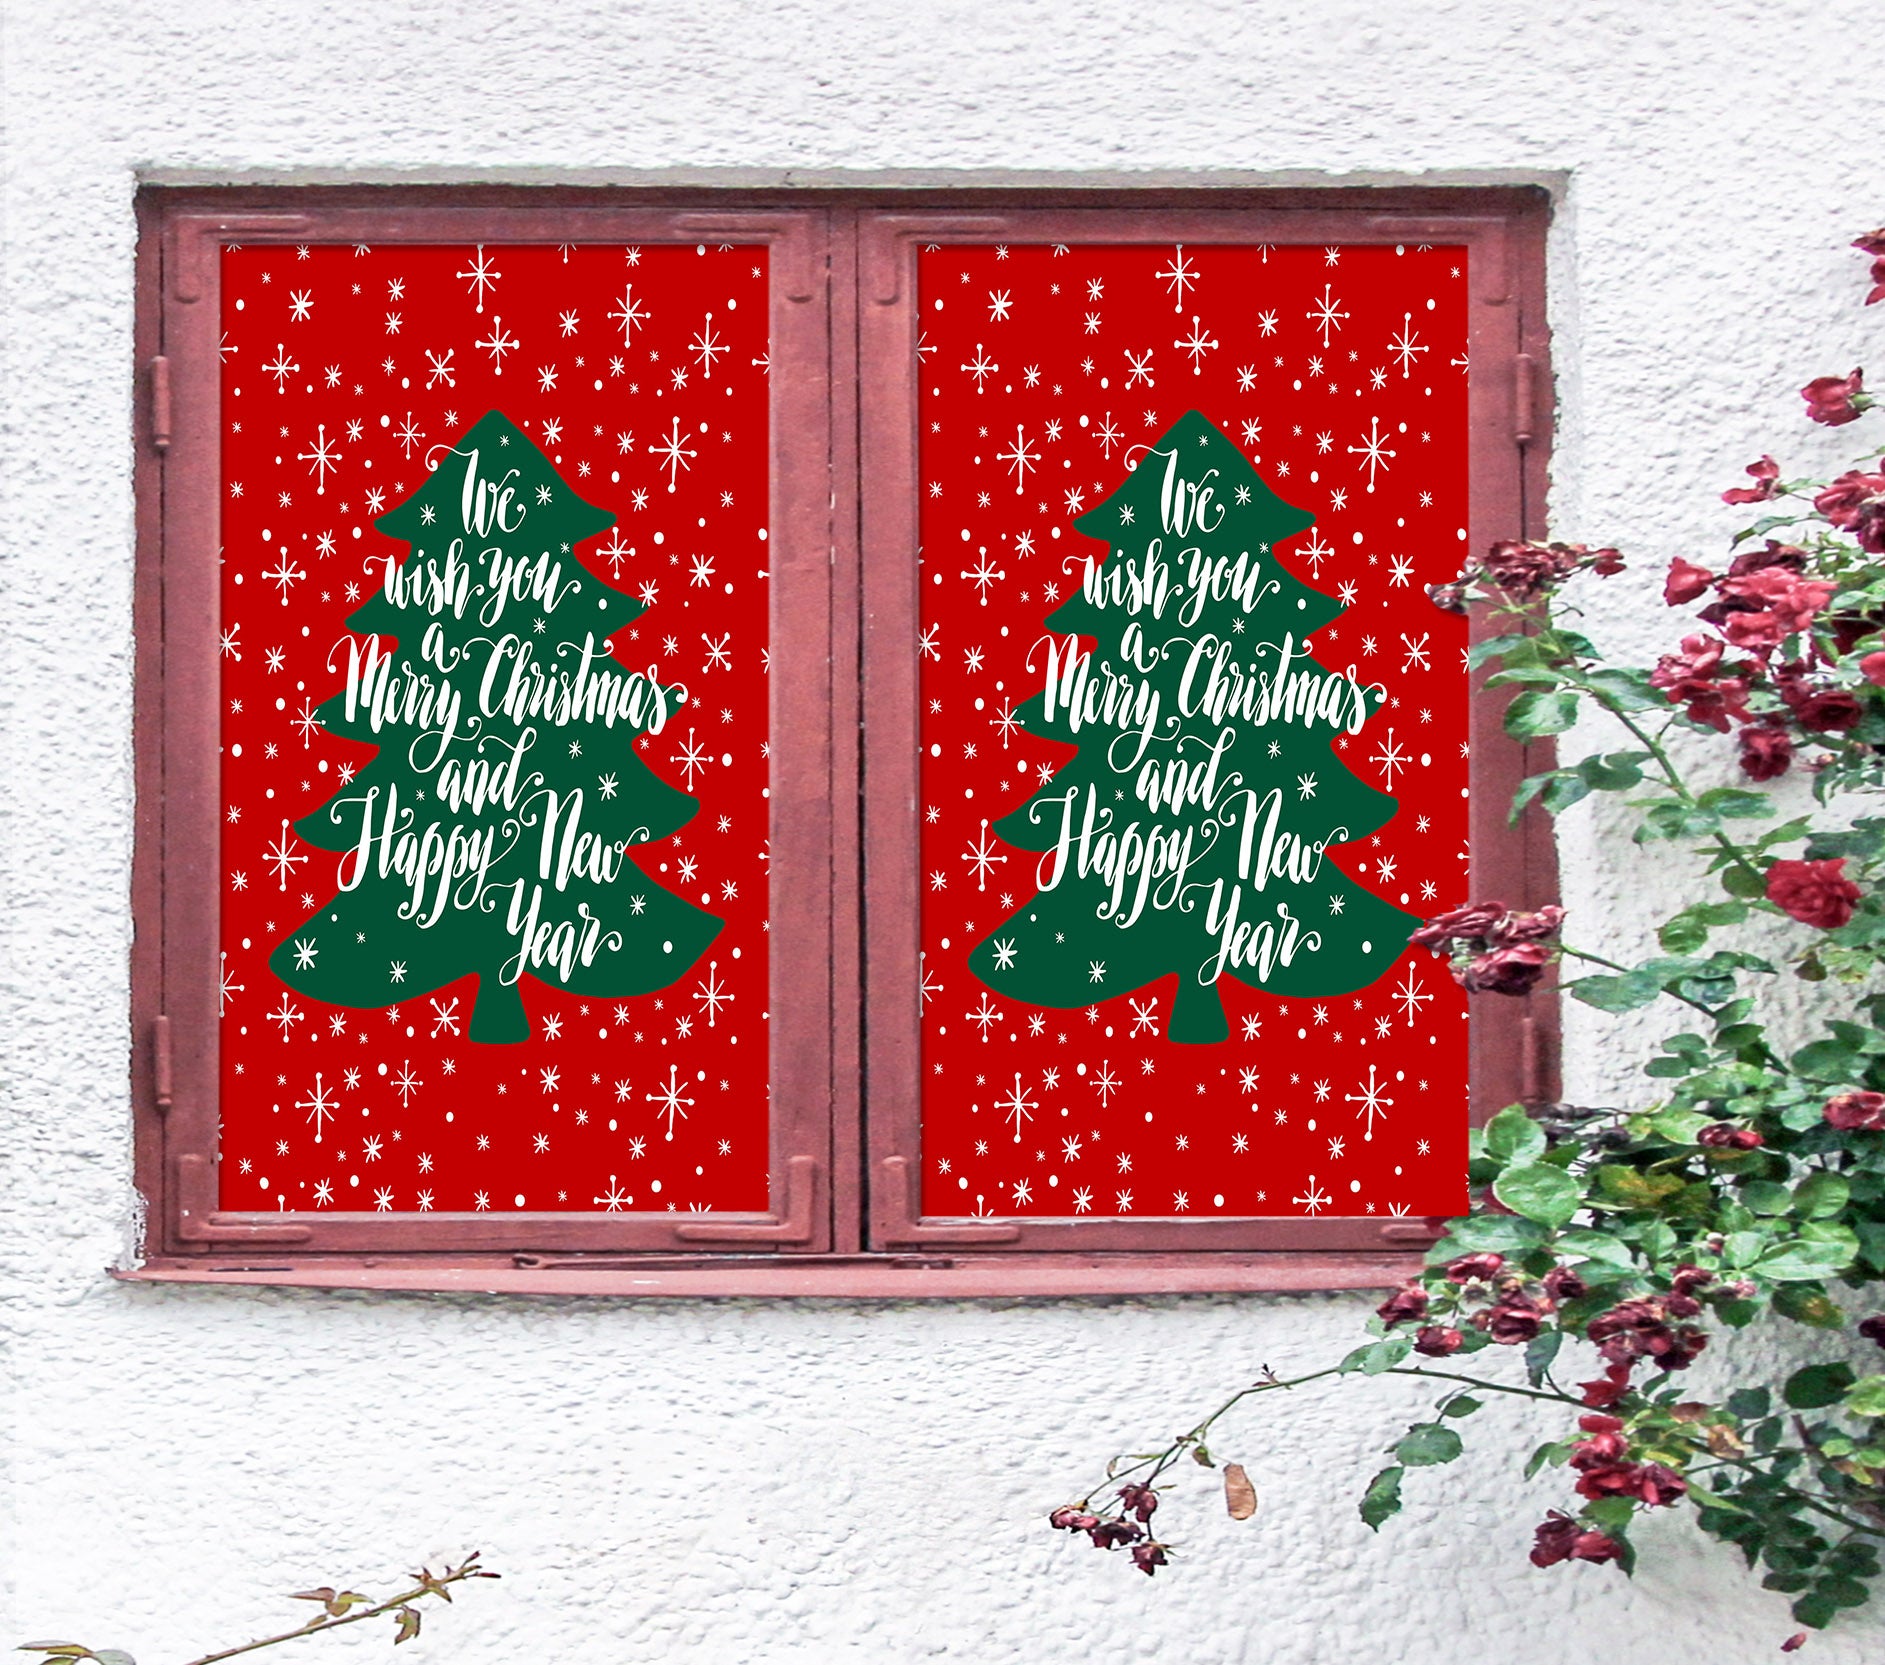 3D Merry Christmas Tree 43122 Christmas Window Film Print Sticker Cling Stained Glass Xmas